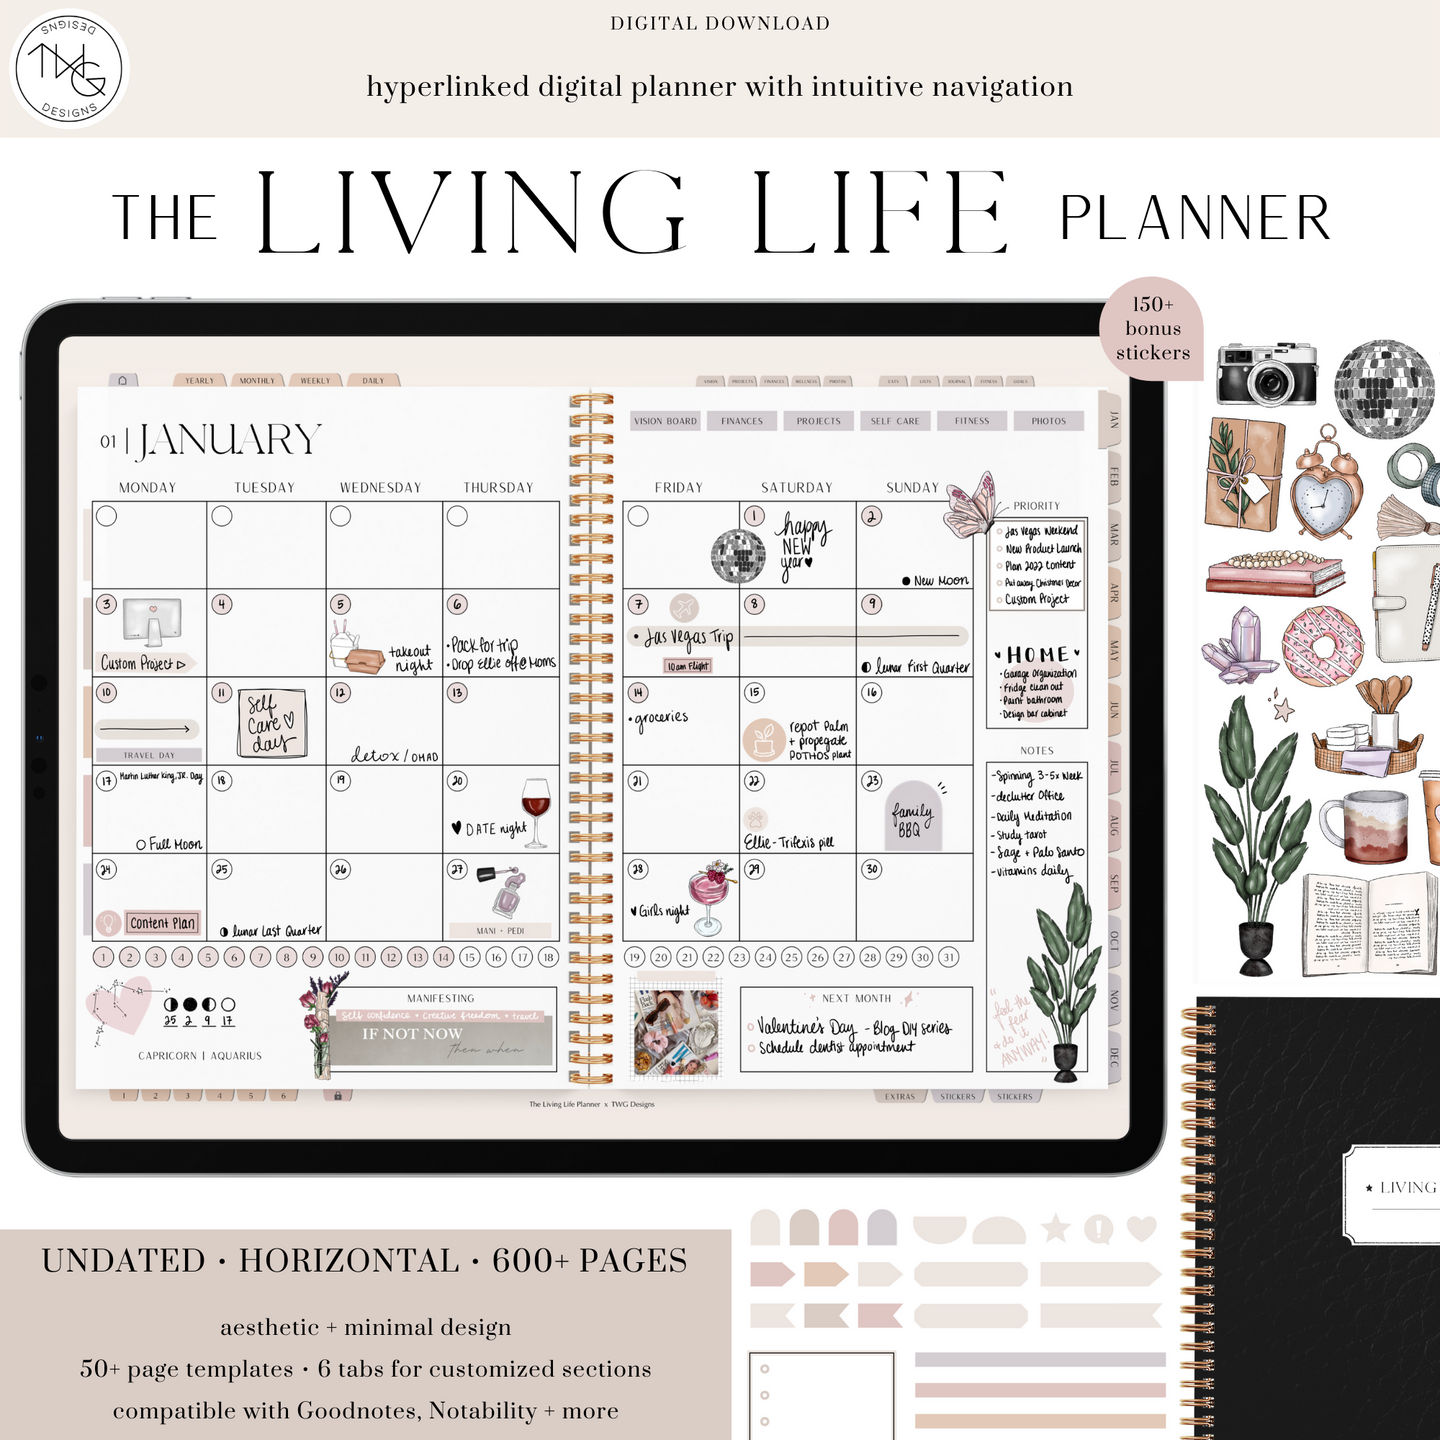 The Living Life Planner